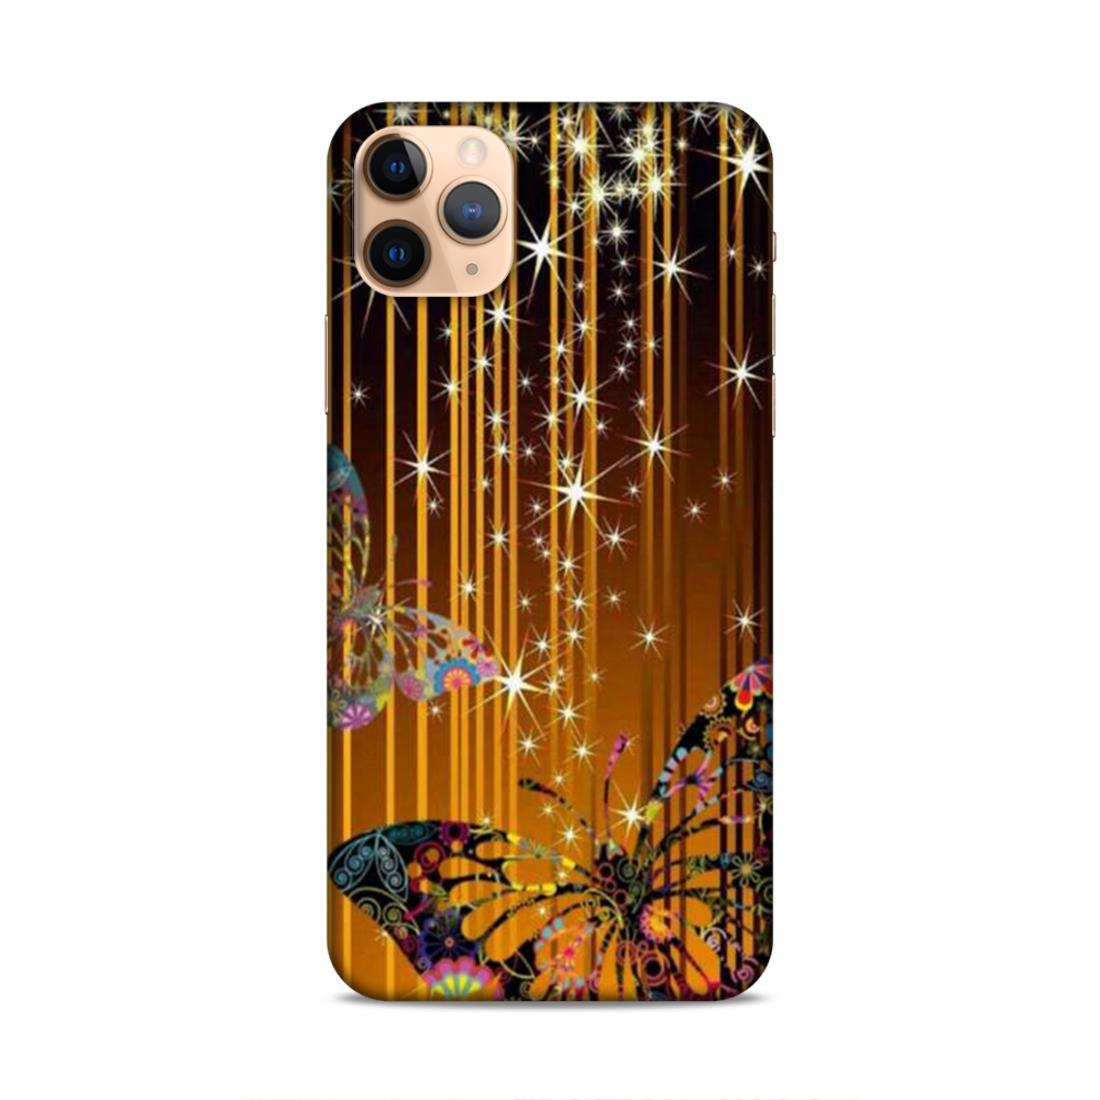 Fancy Star Butterfly iPhone 11 Pro Mobile Cover Case